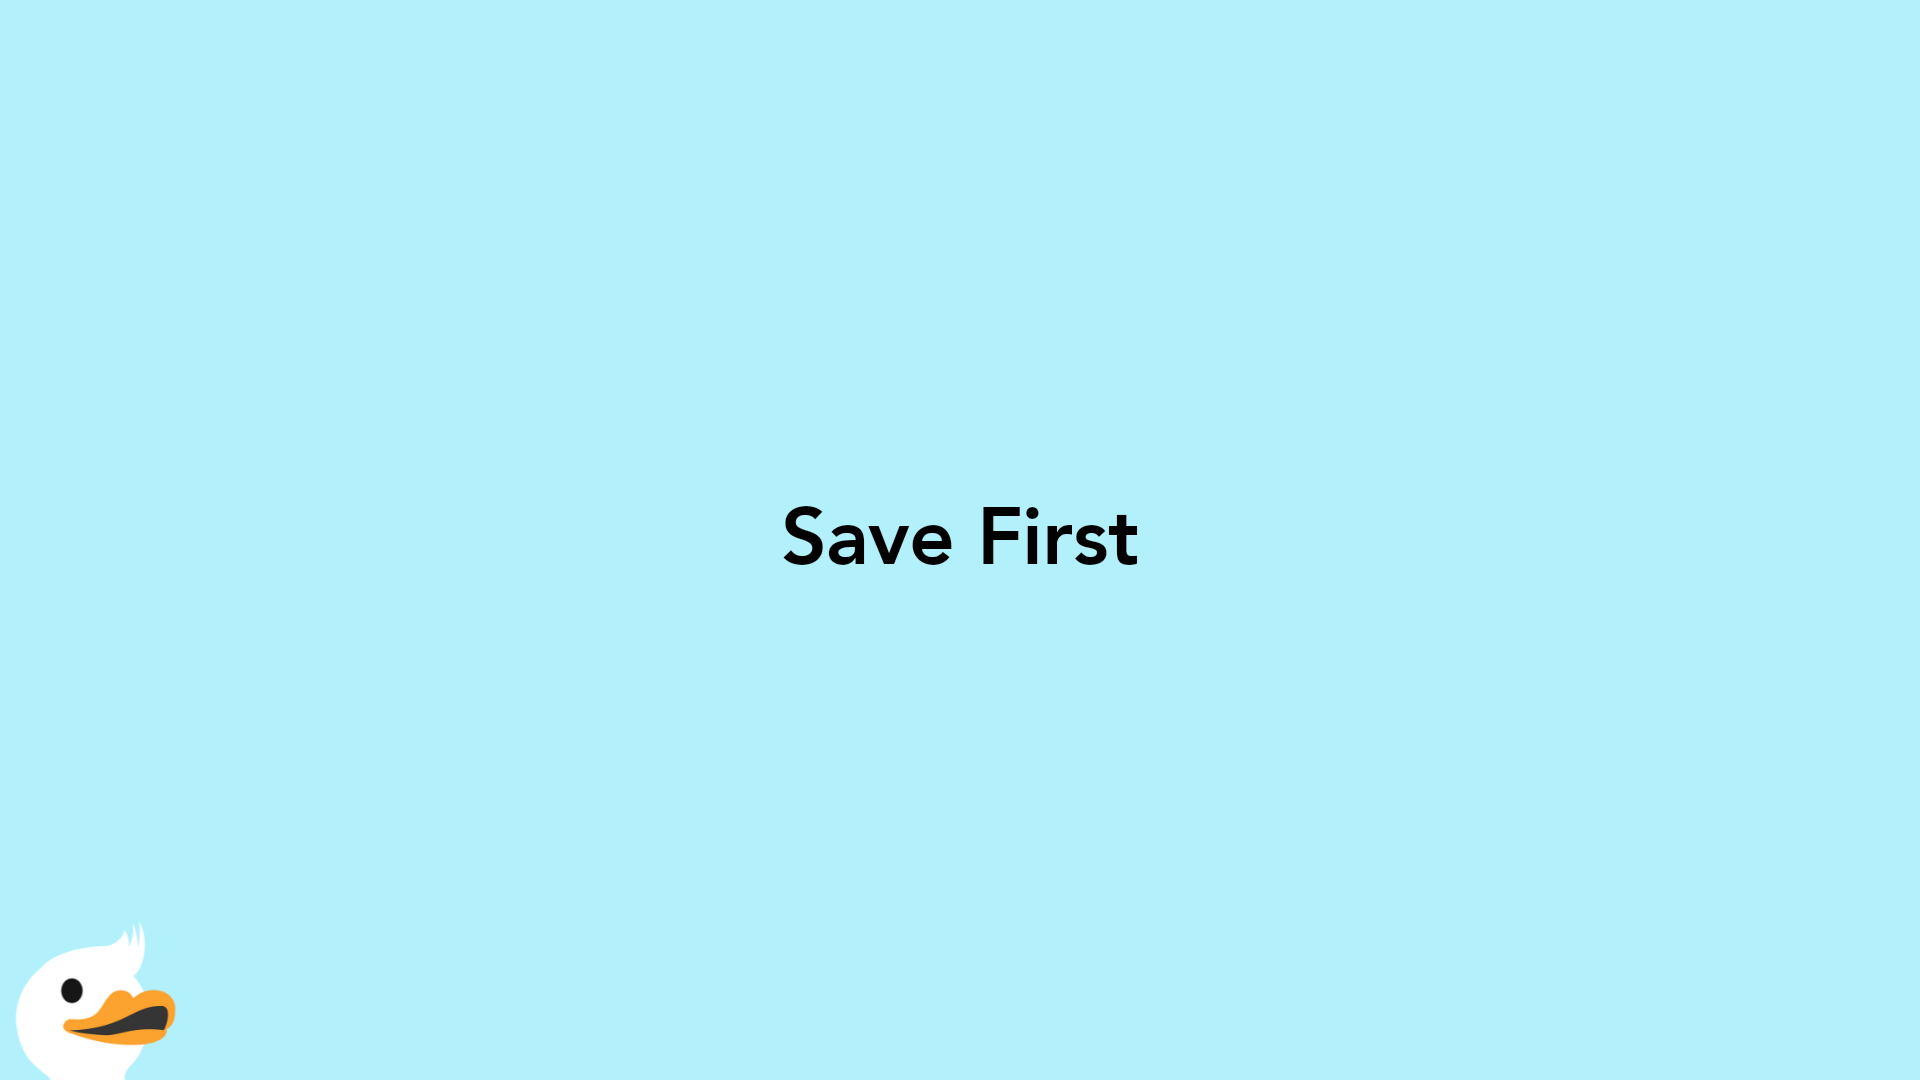 Save First